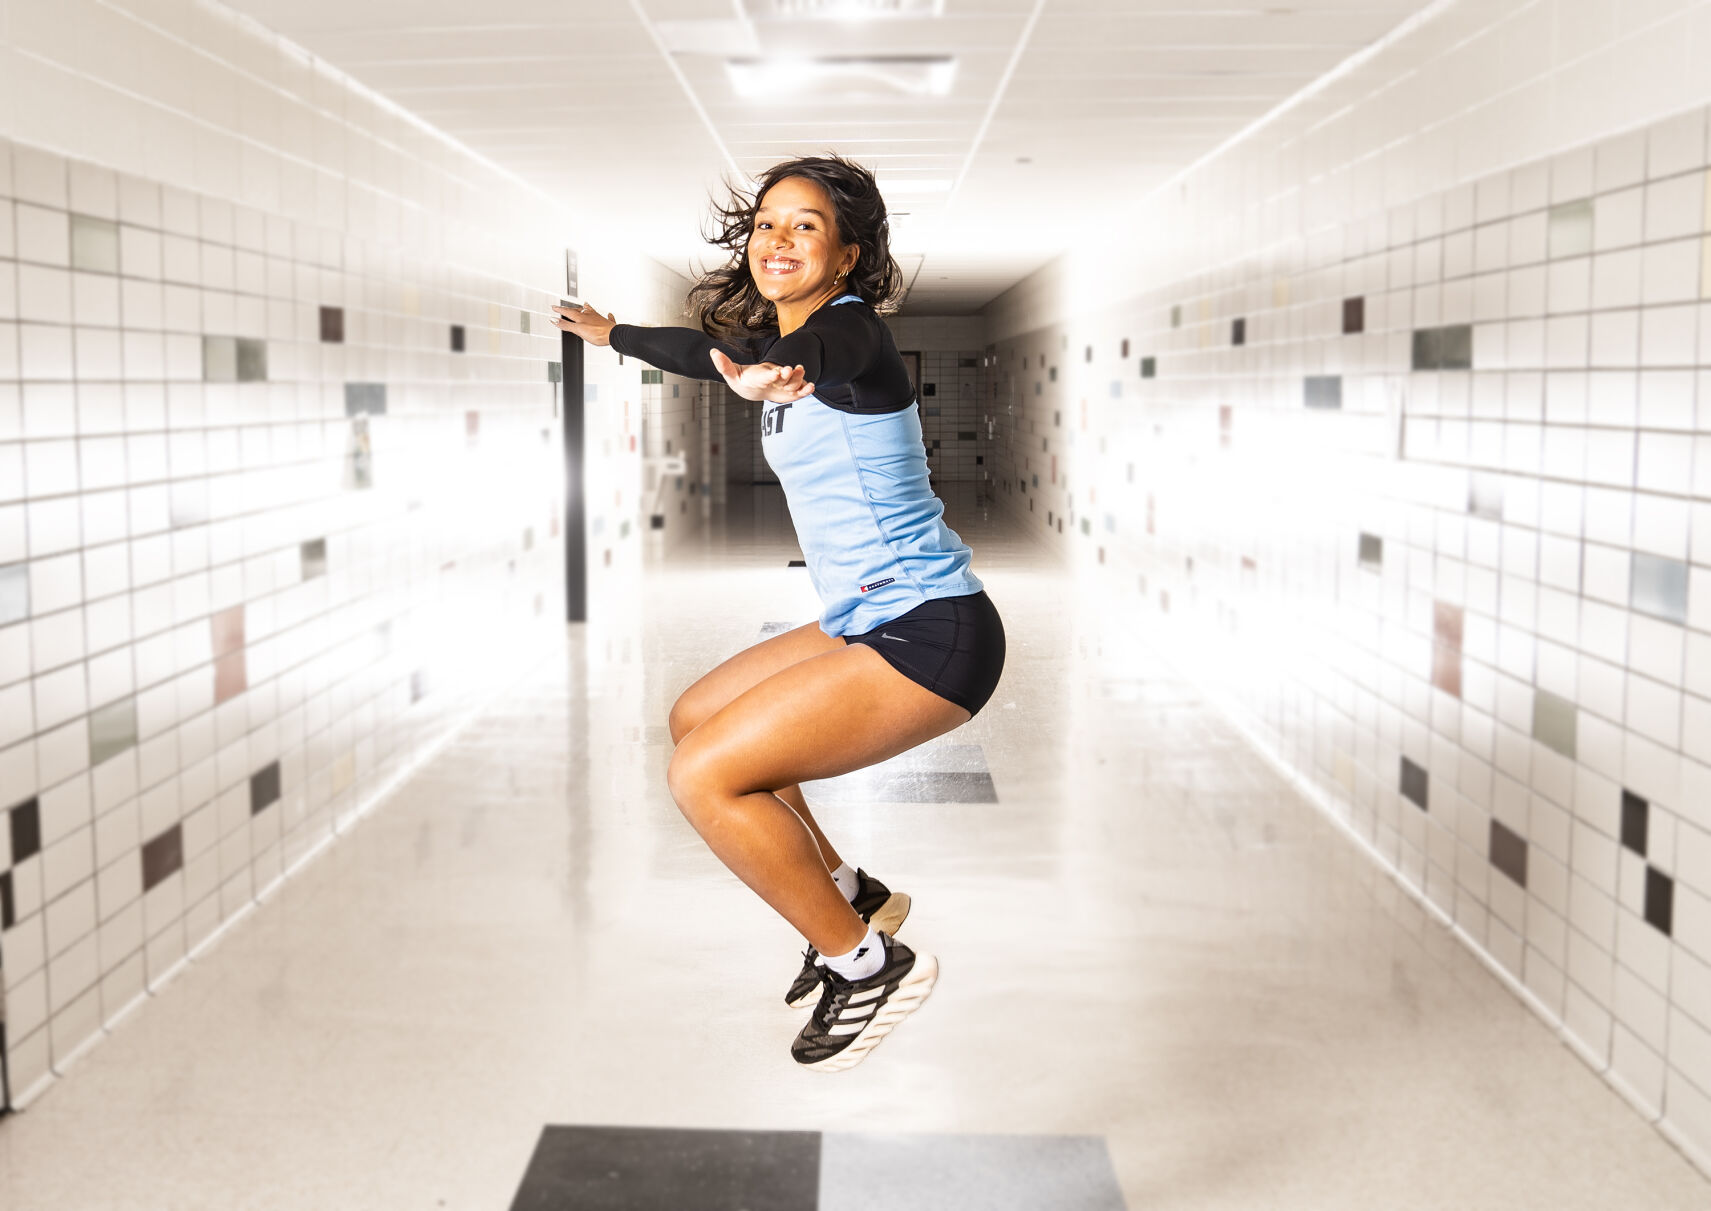 Cheyenne East’s Taliah Morris shatters Wyoming record with 20-foot jump